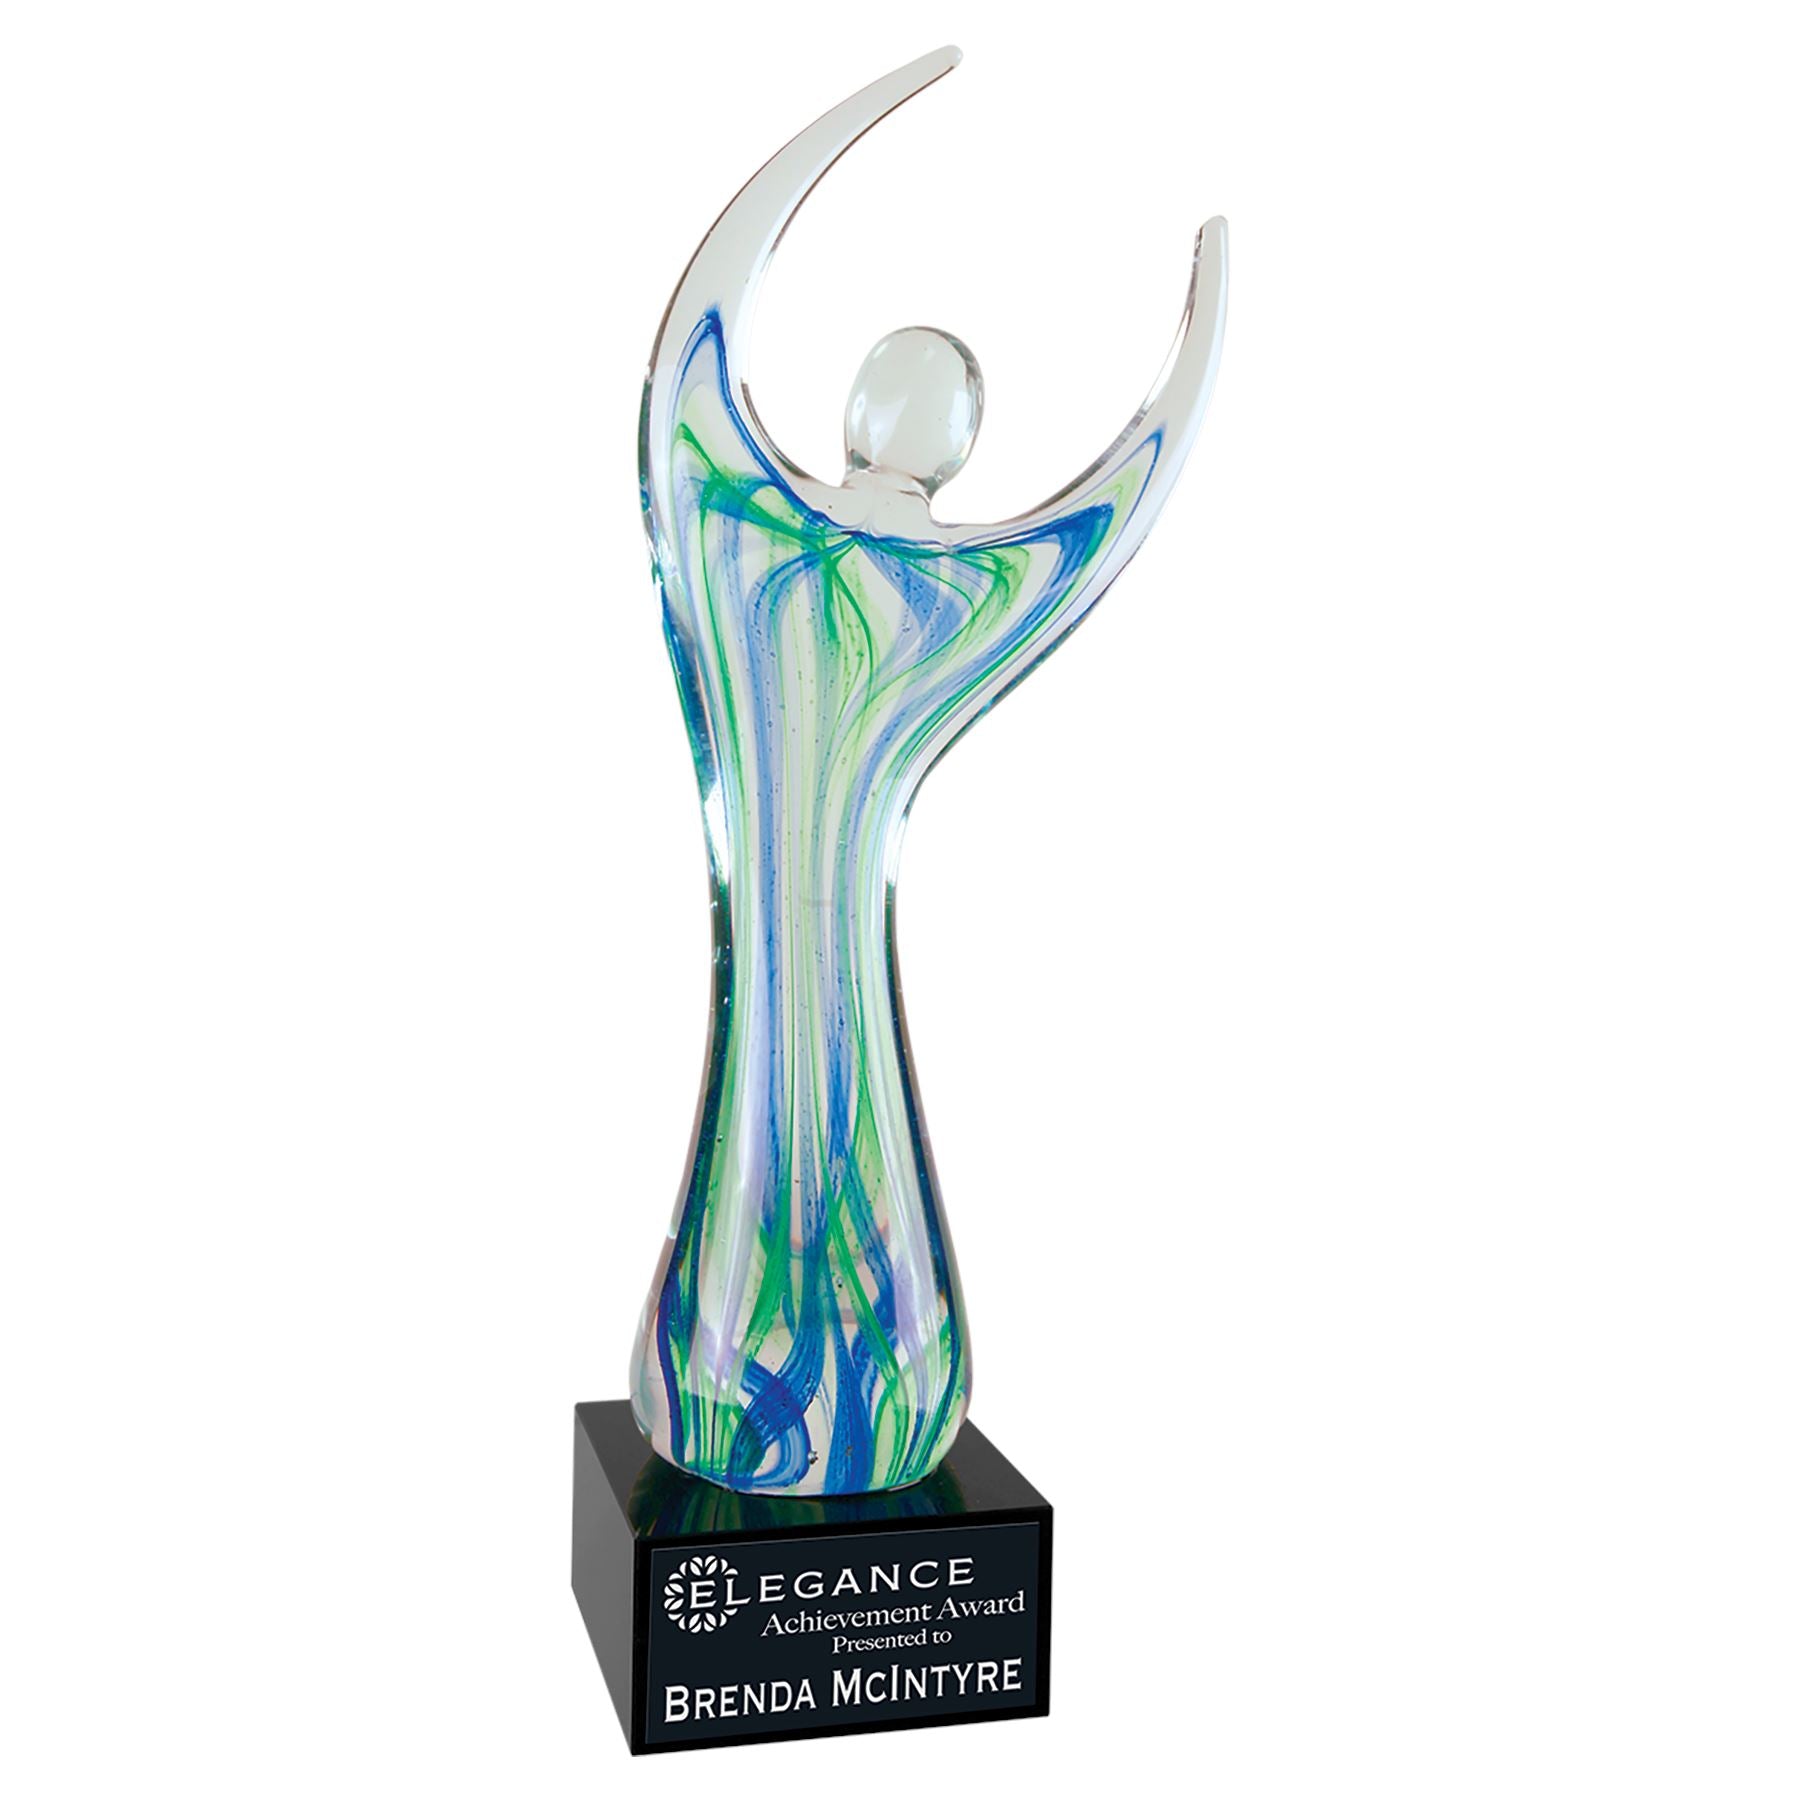 Raised Arms with Square Black Base, 12" Art Glass Award, Laser Engraved Art Glass Craftworks NW 